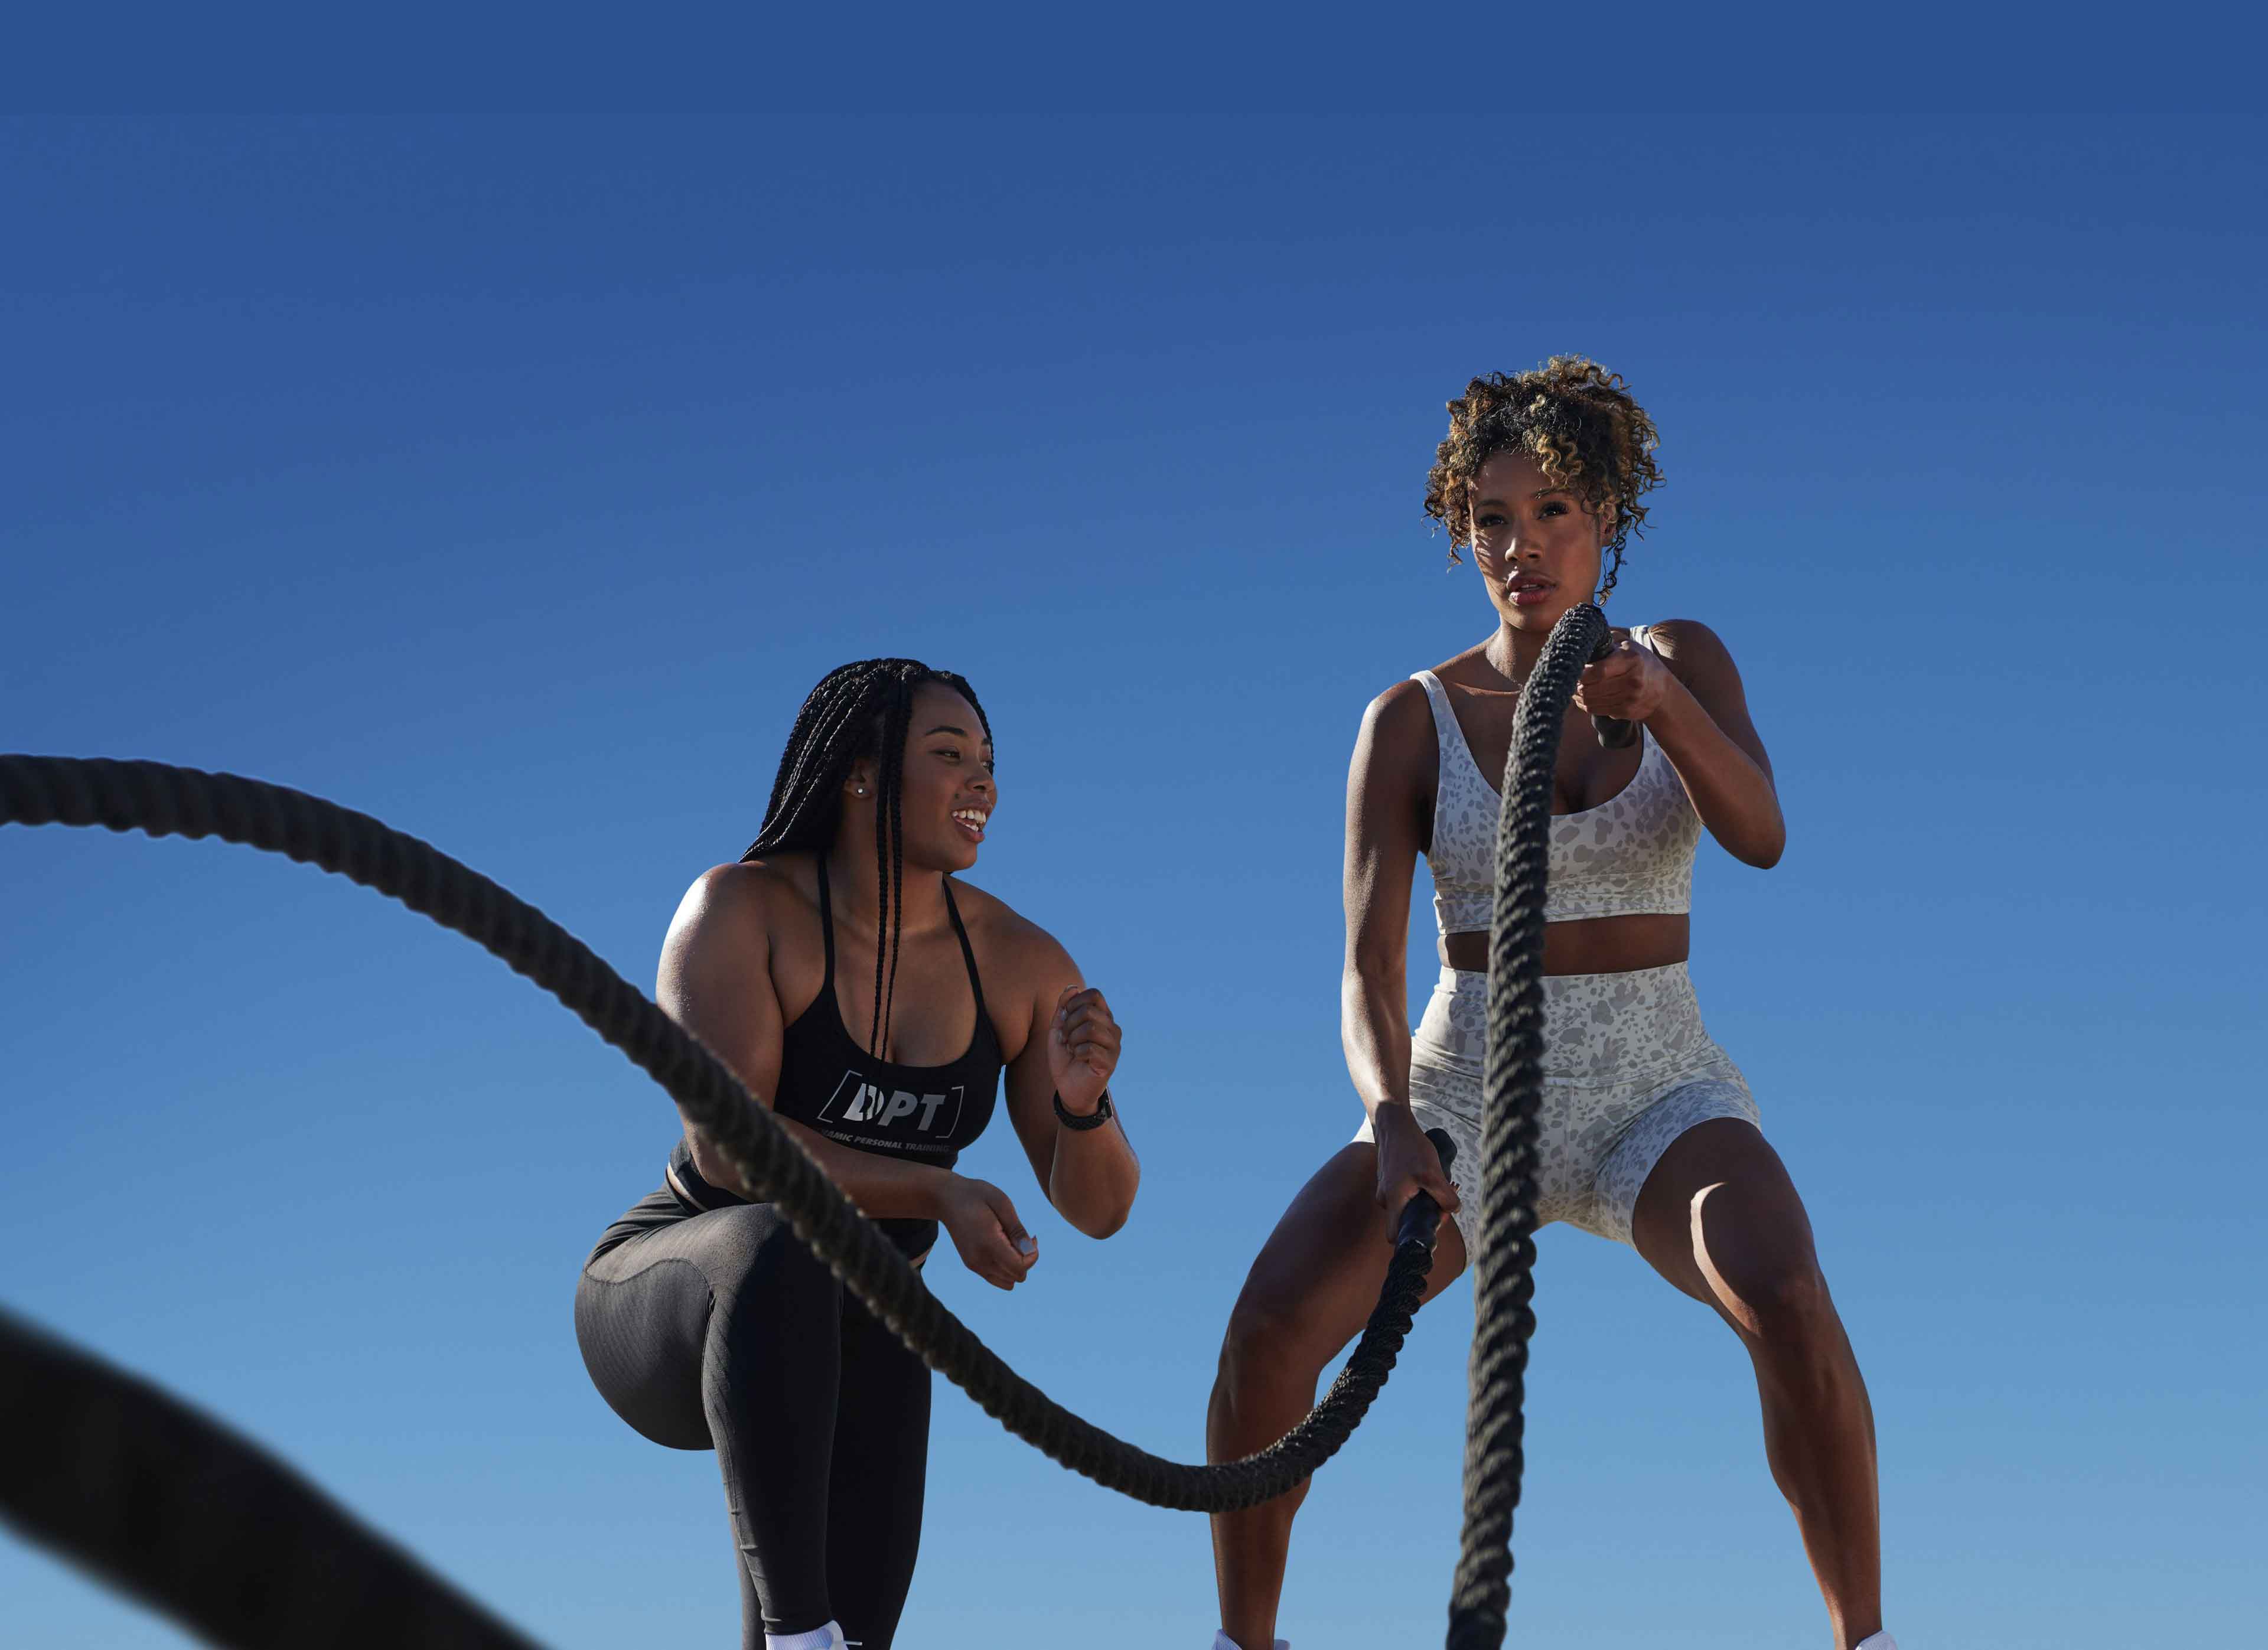 A female client works the battle ropes as her trainer kneels alongside her giving her encouragement.